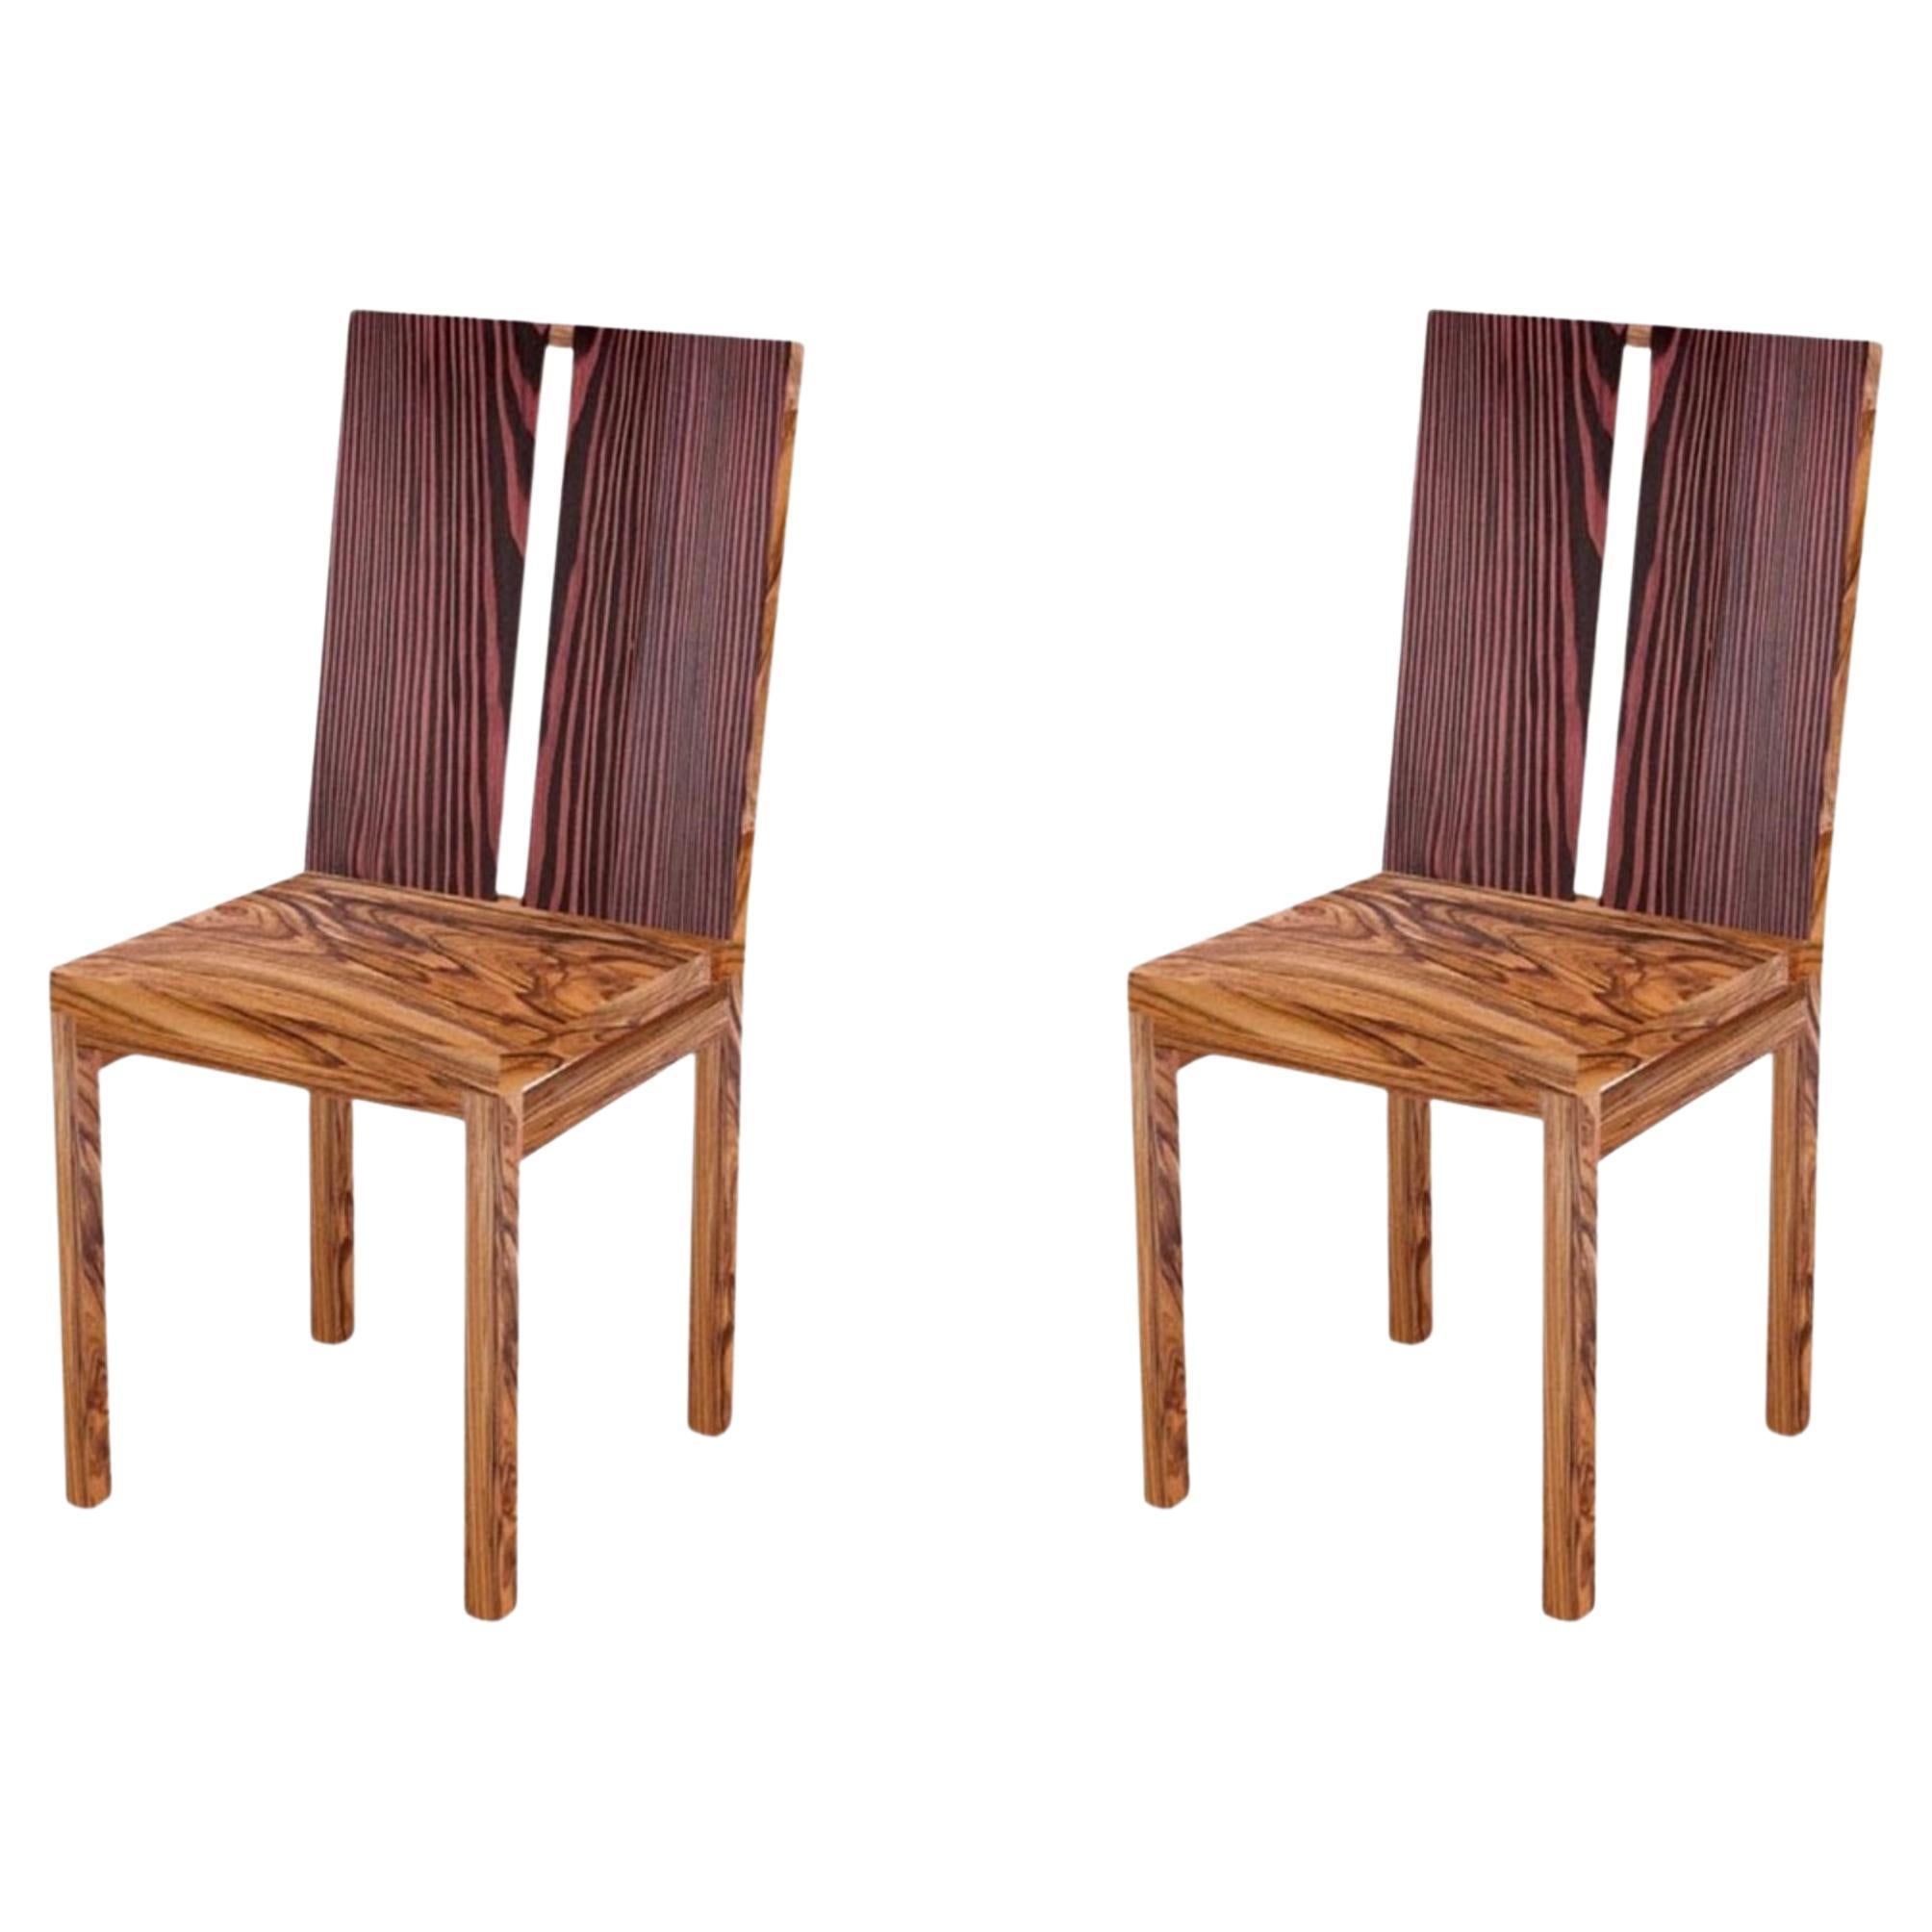 Set of 2 Two Stripe Chairs by Derya Arpac